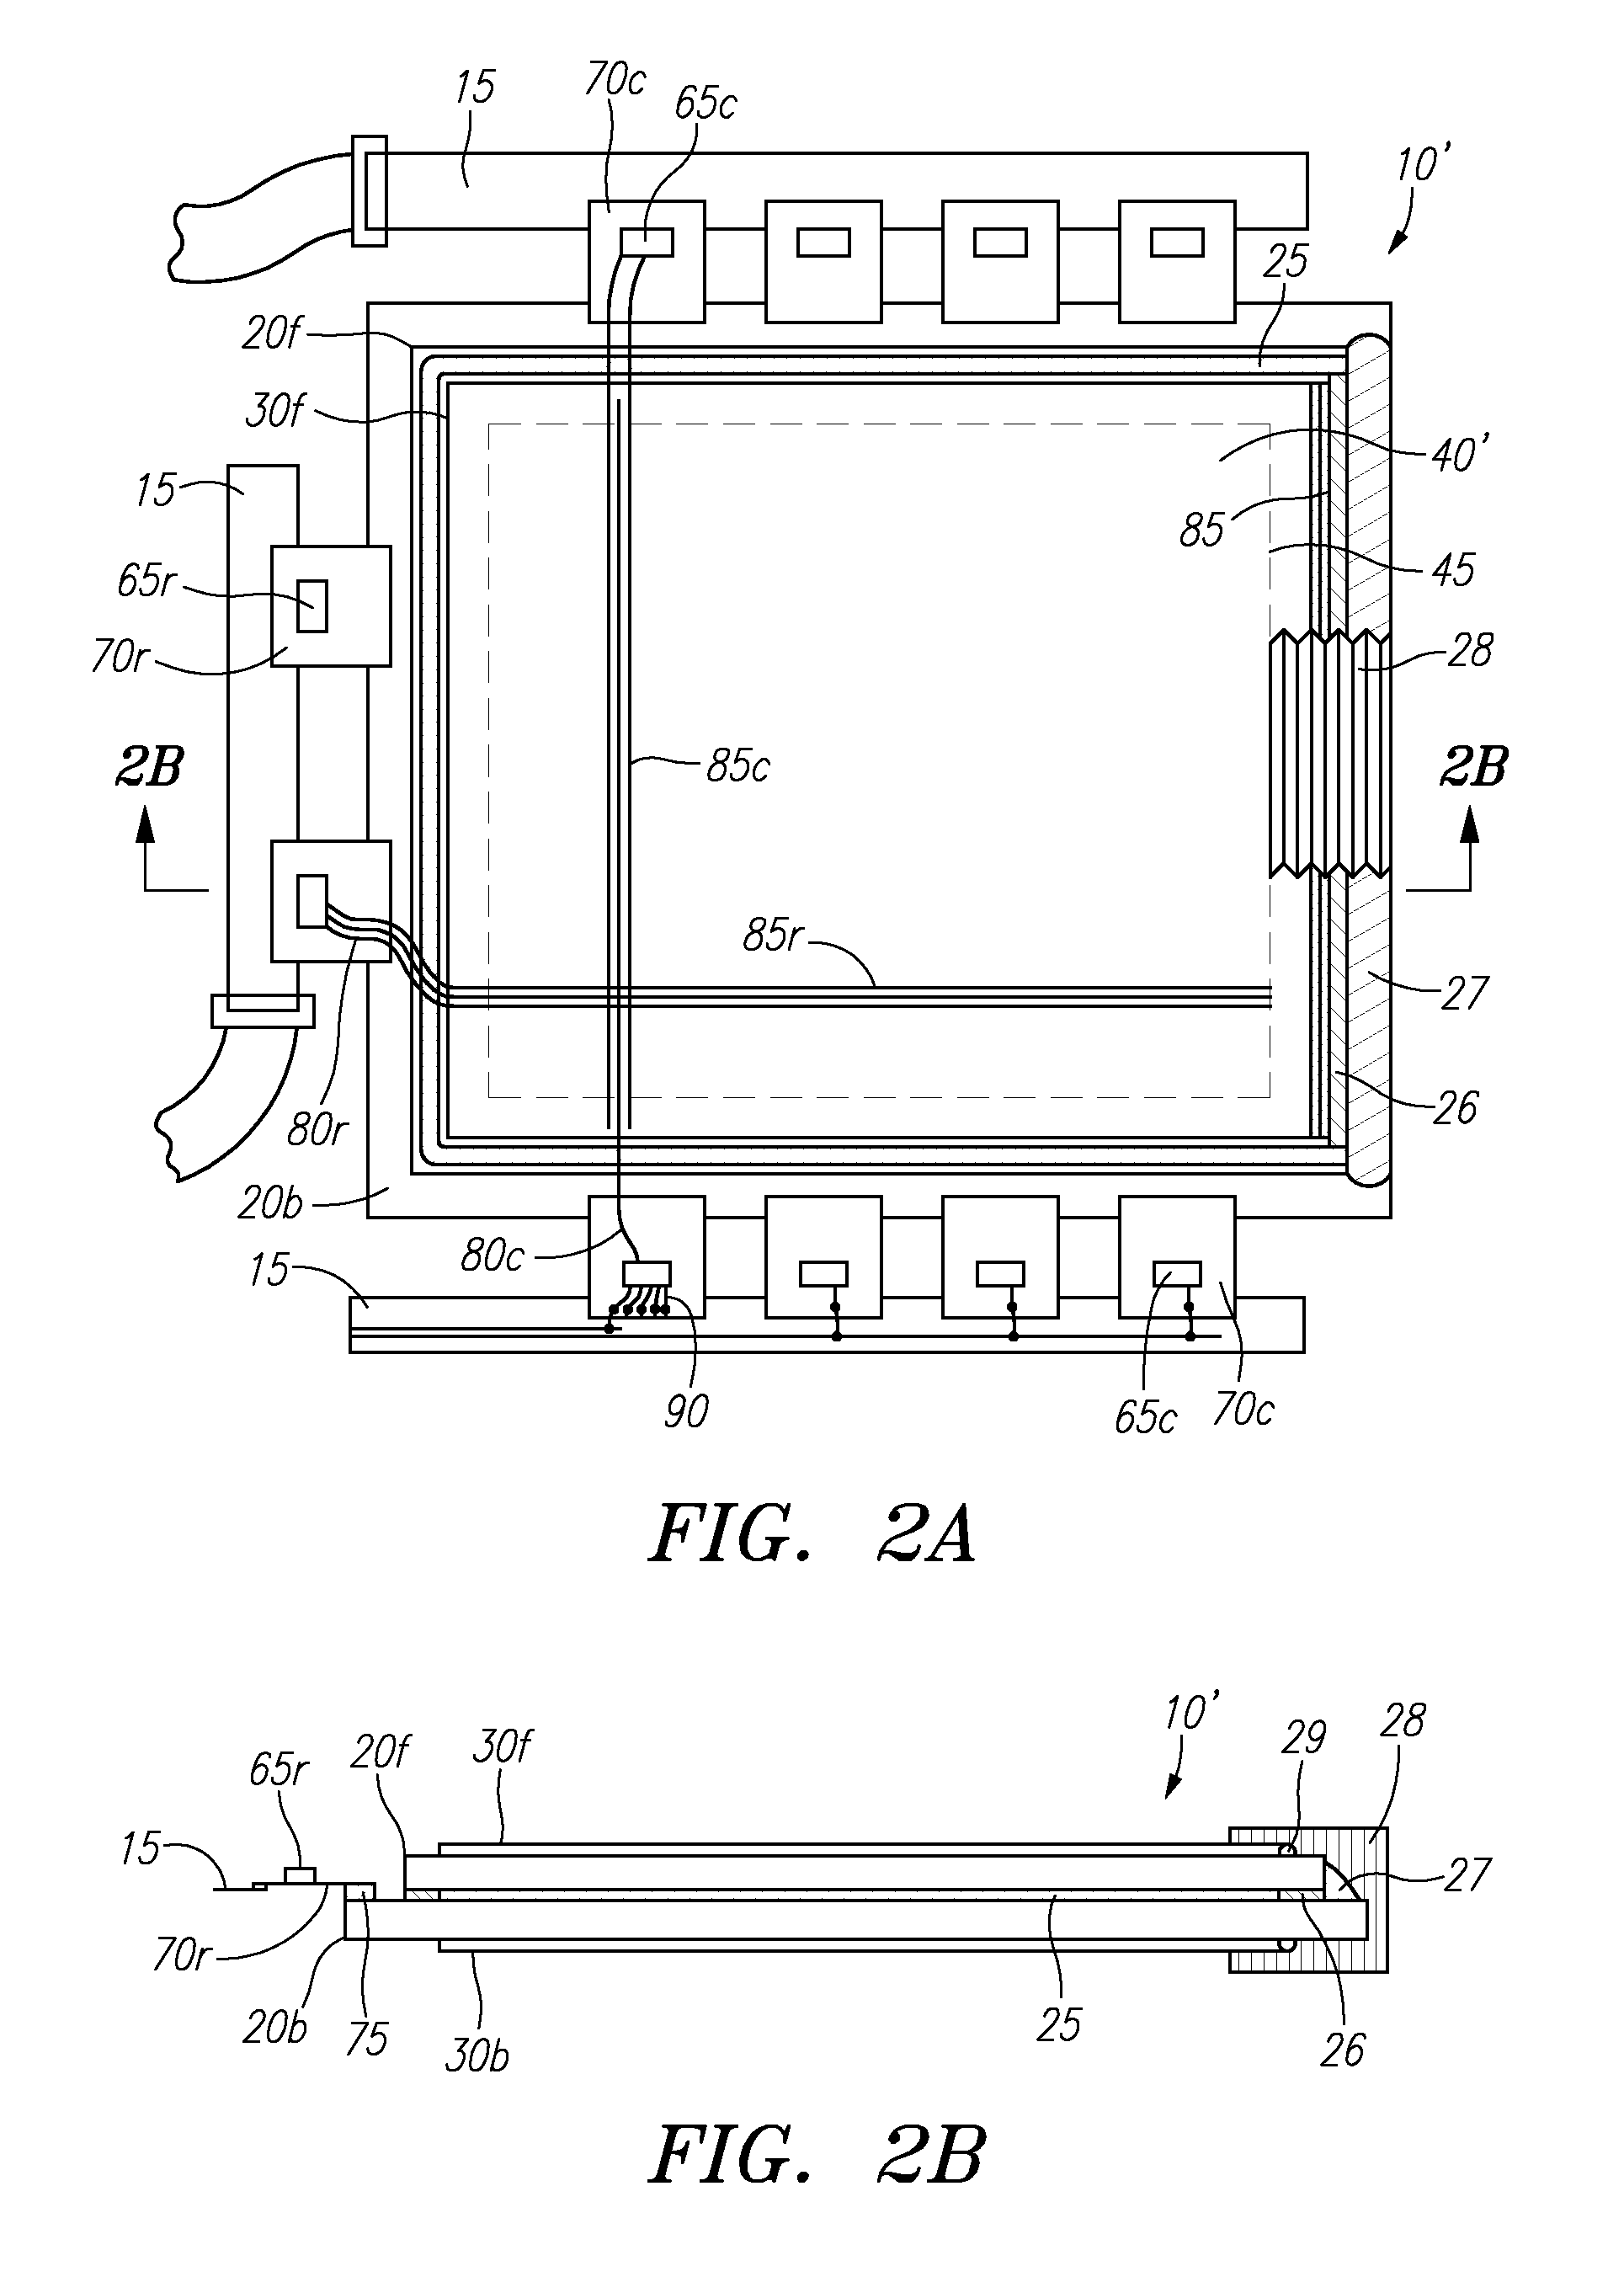 Apparatus and methods for resizing electronic displays